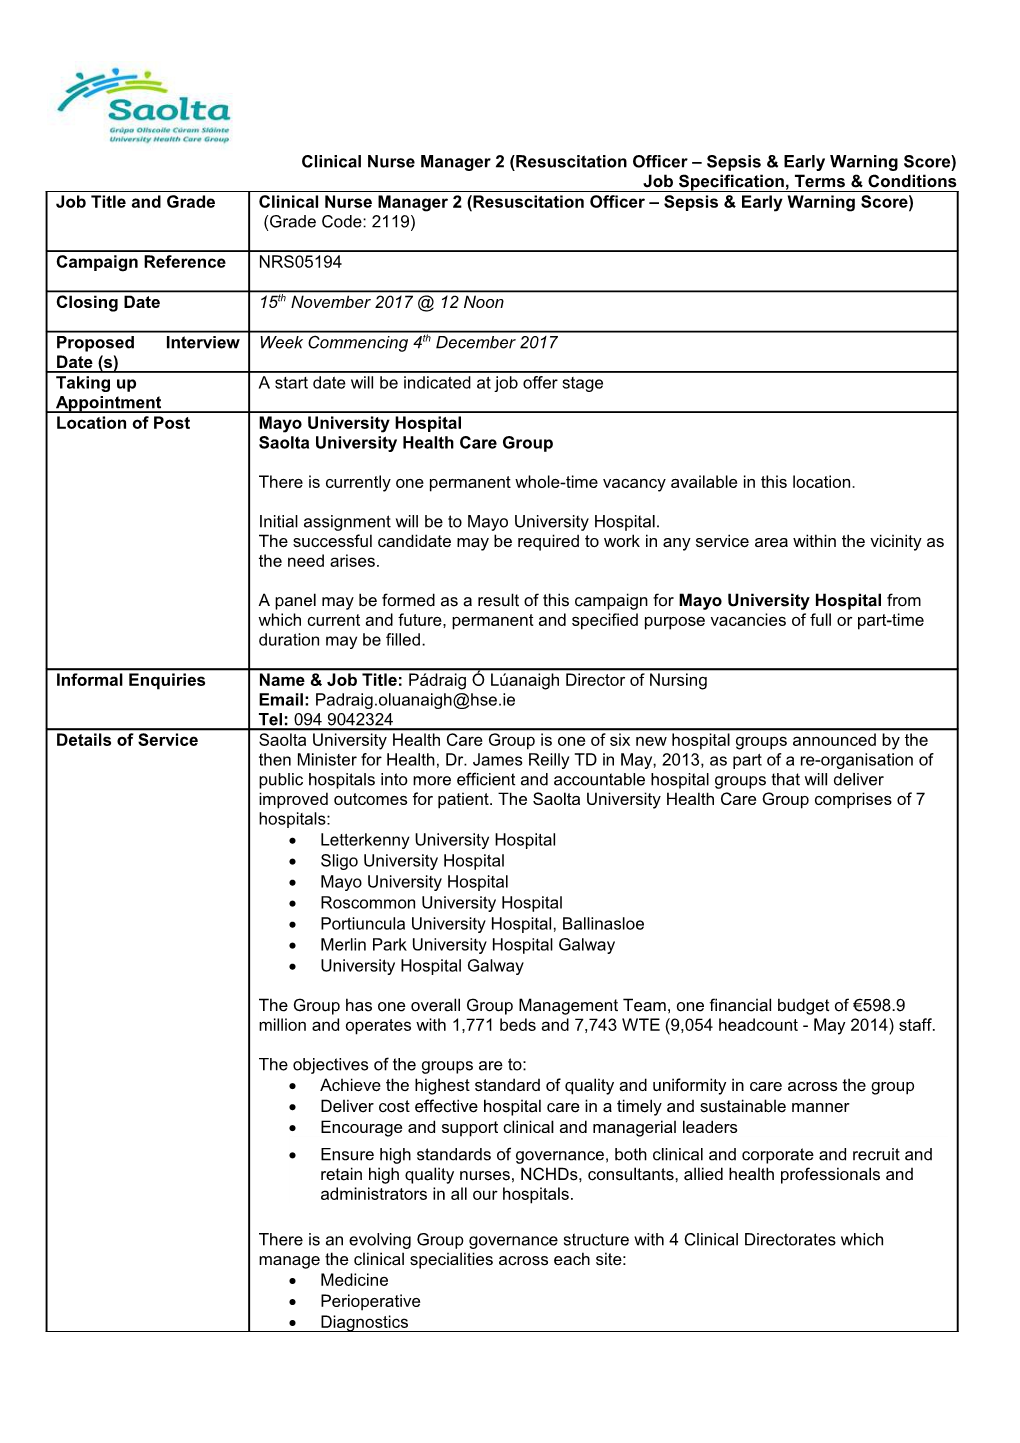 Clinical Nurse Manager 2 (Resuscitation Officer Sepsis & Early Warning Score)